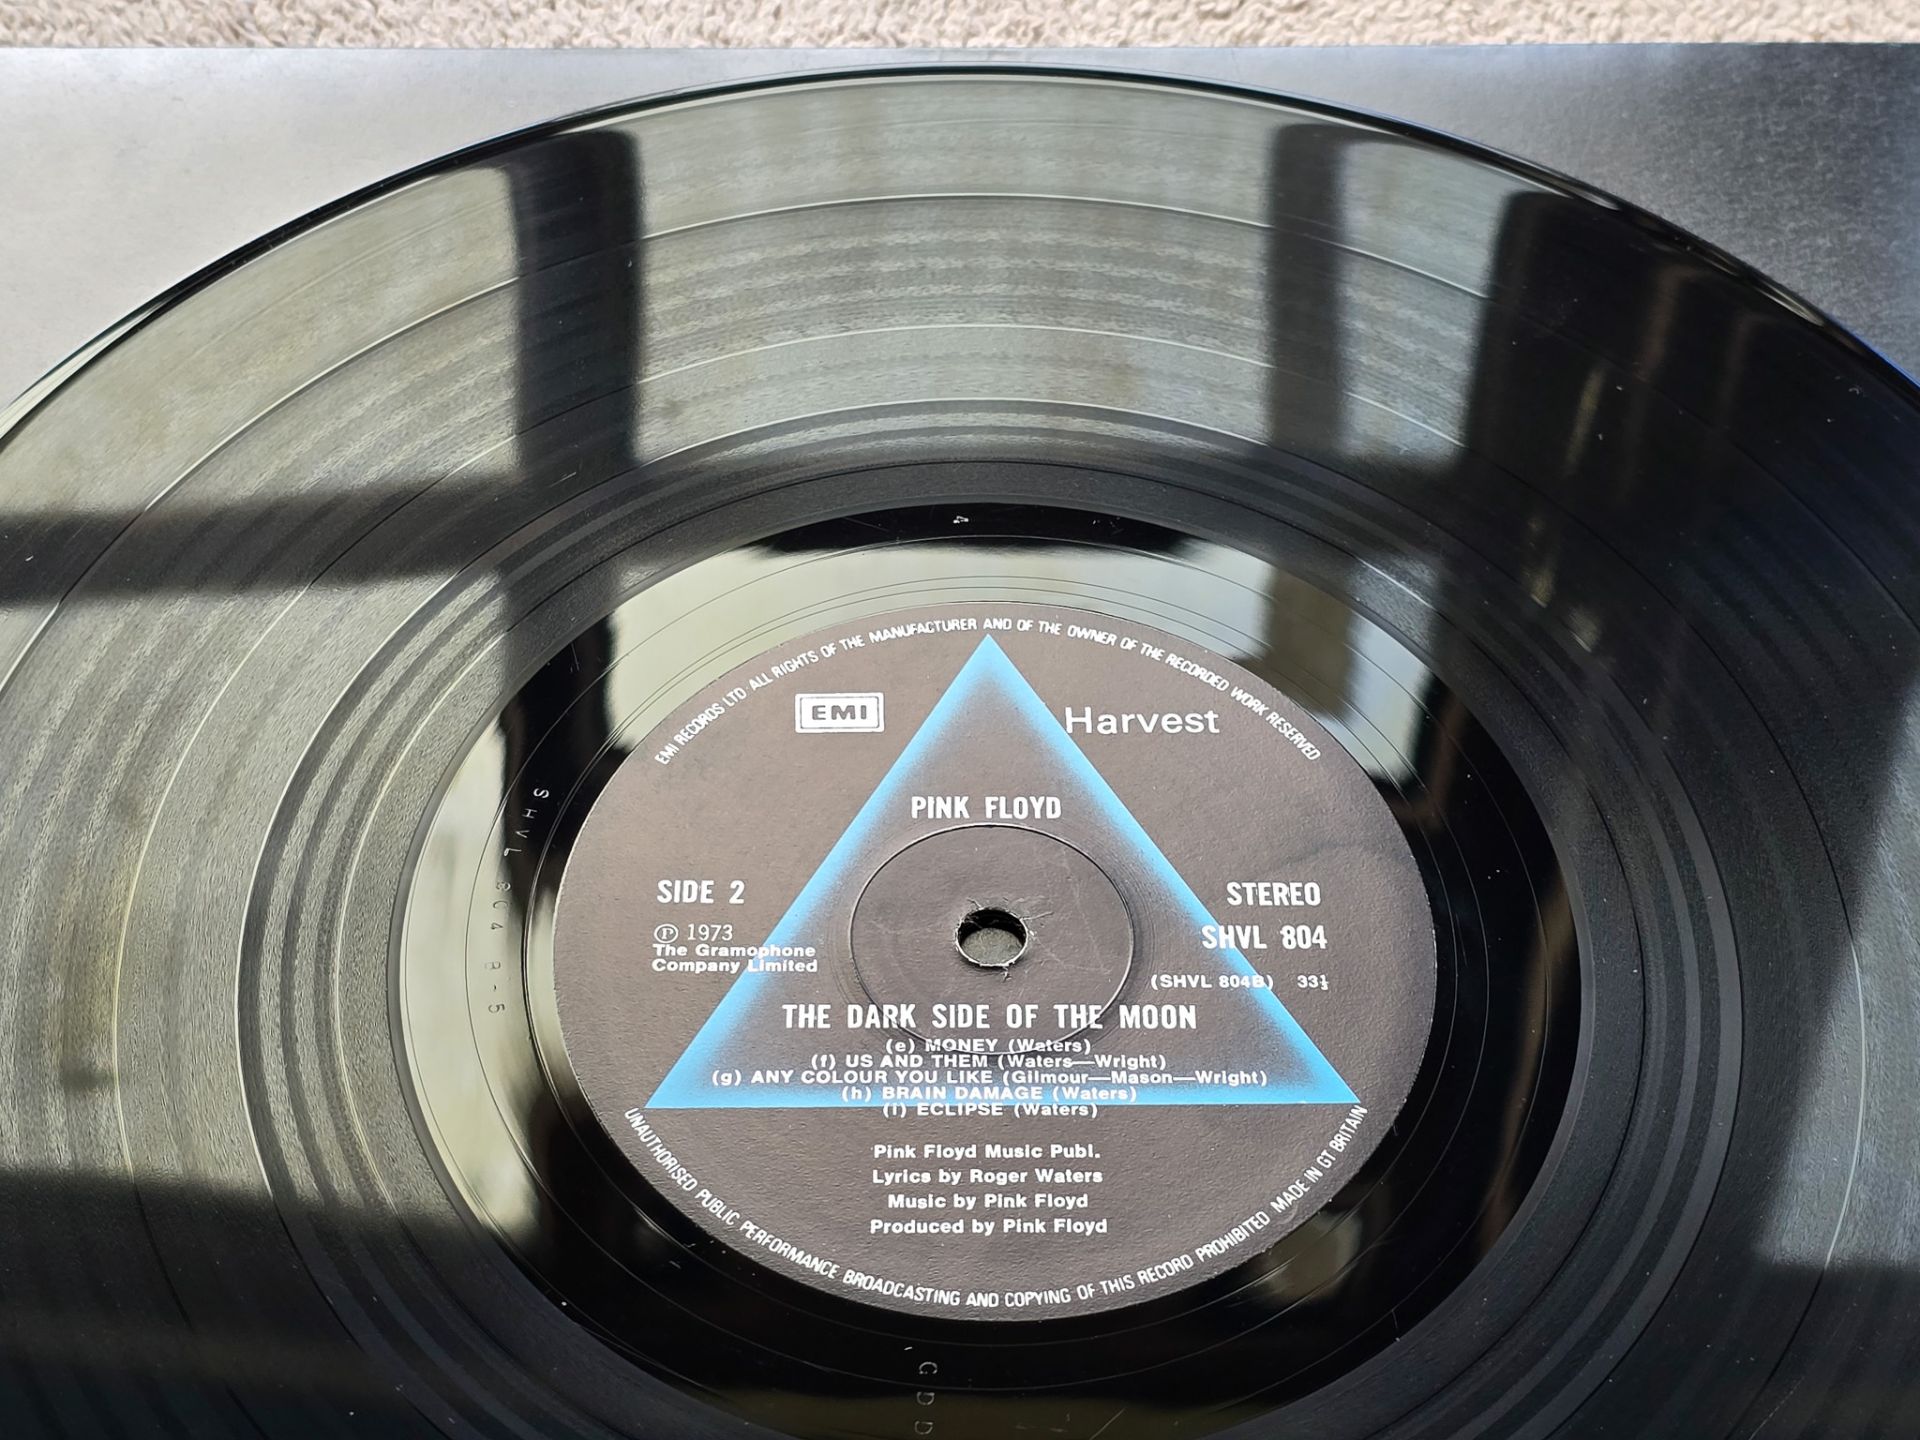 Pink Floyd – The Dark Side Of The Moon early UK Vinyl LP + 2 Posters & Sticker - Image 7 of 11